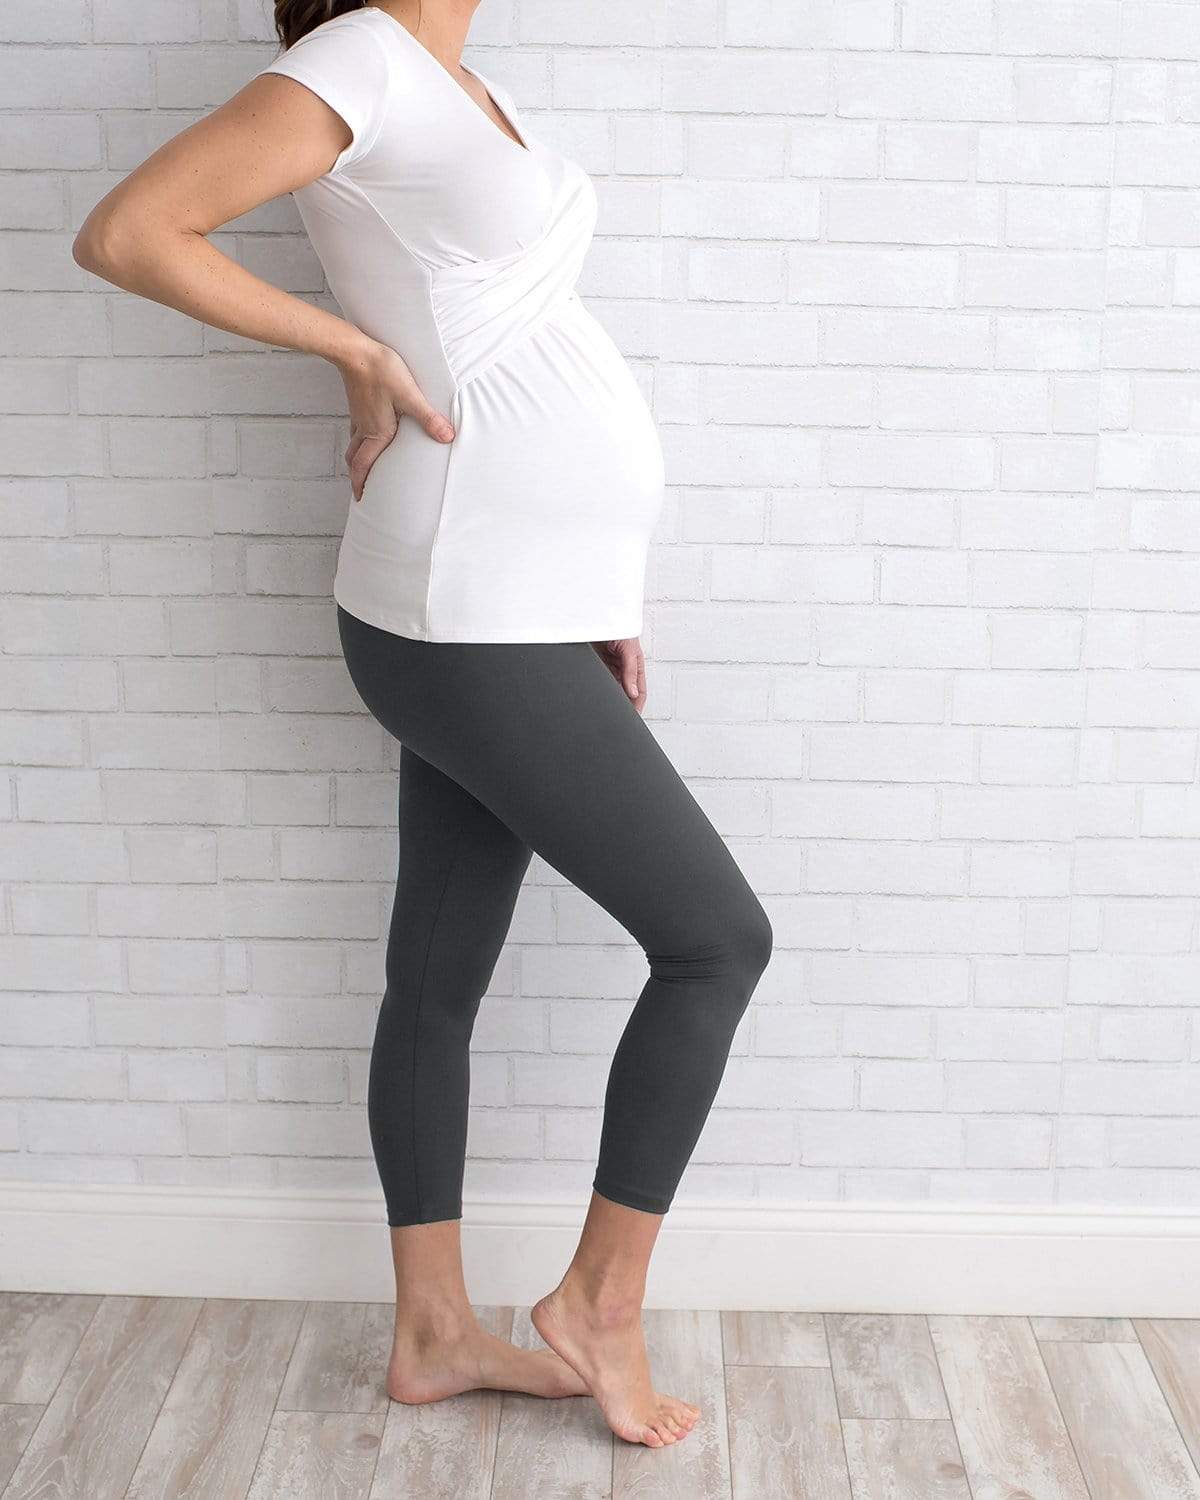 Womens Maternity Leggings Over The Belly Pregnancy Yoga Pants Active Wear  Workout Leggings Navy Blue Small